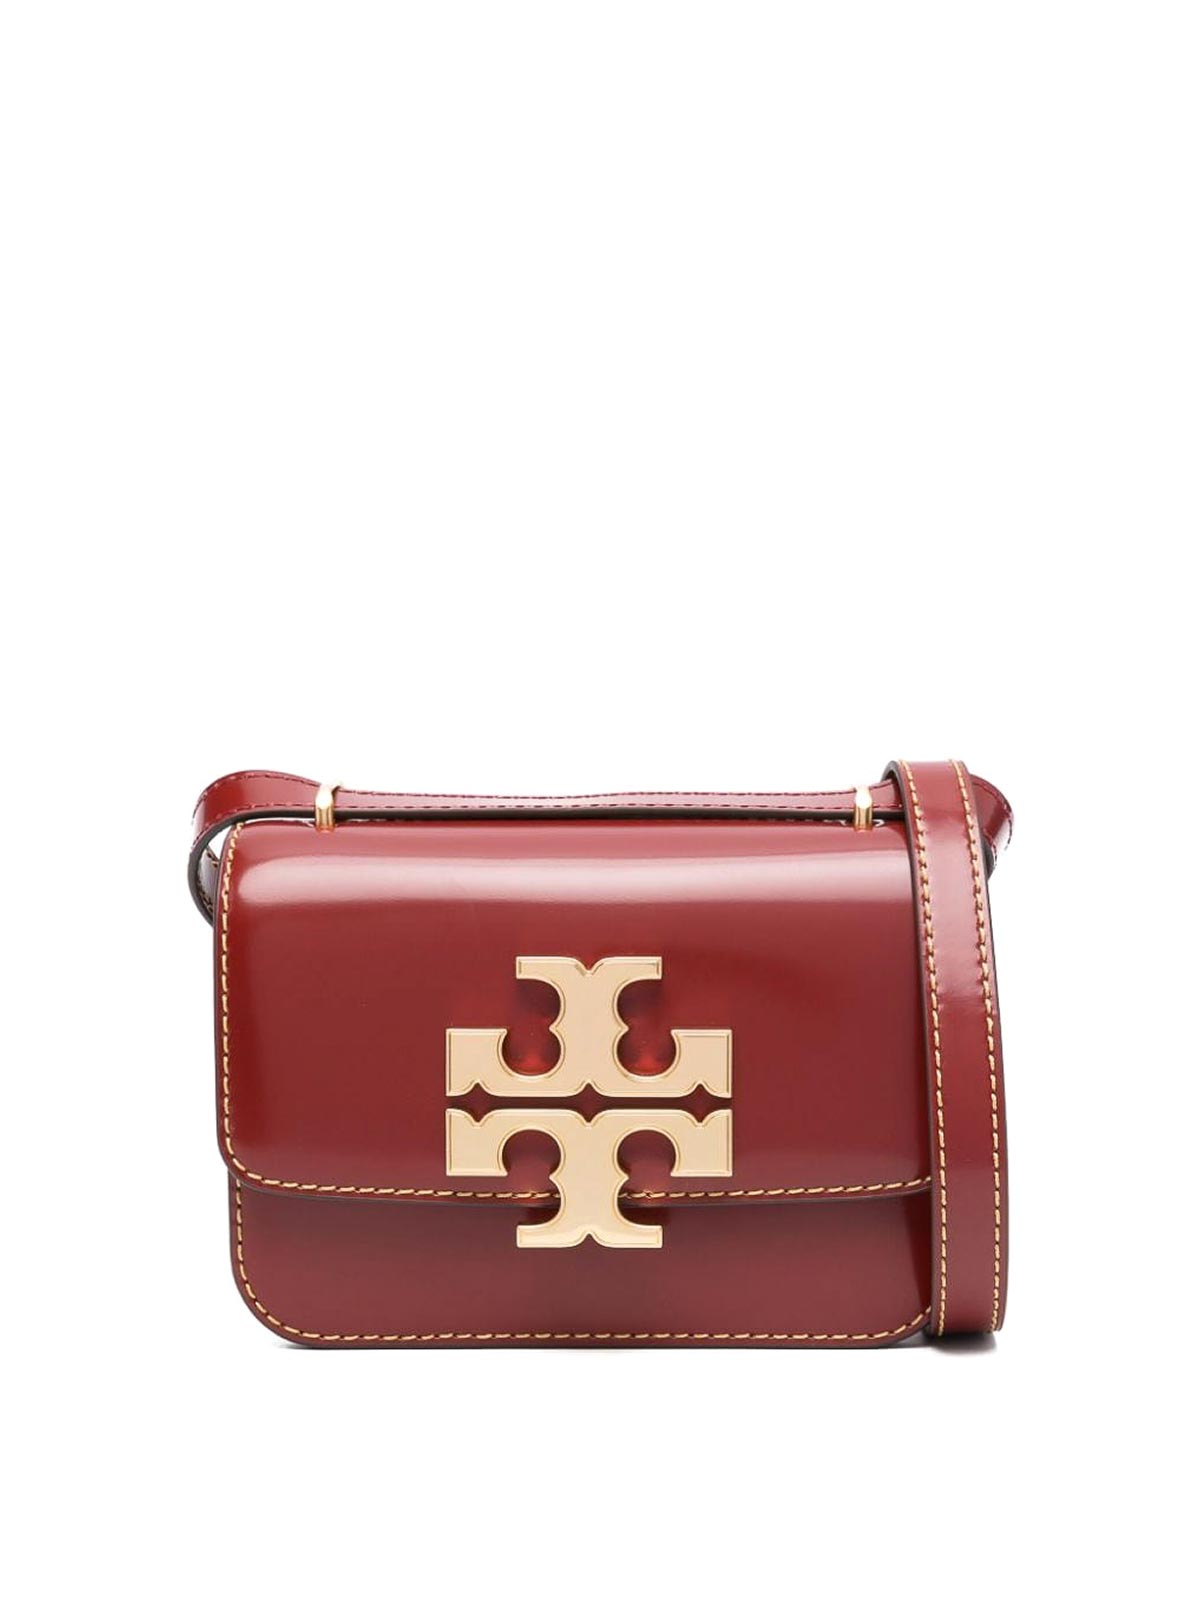 Tory Burch Convertible Shoulder Bag In Red